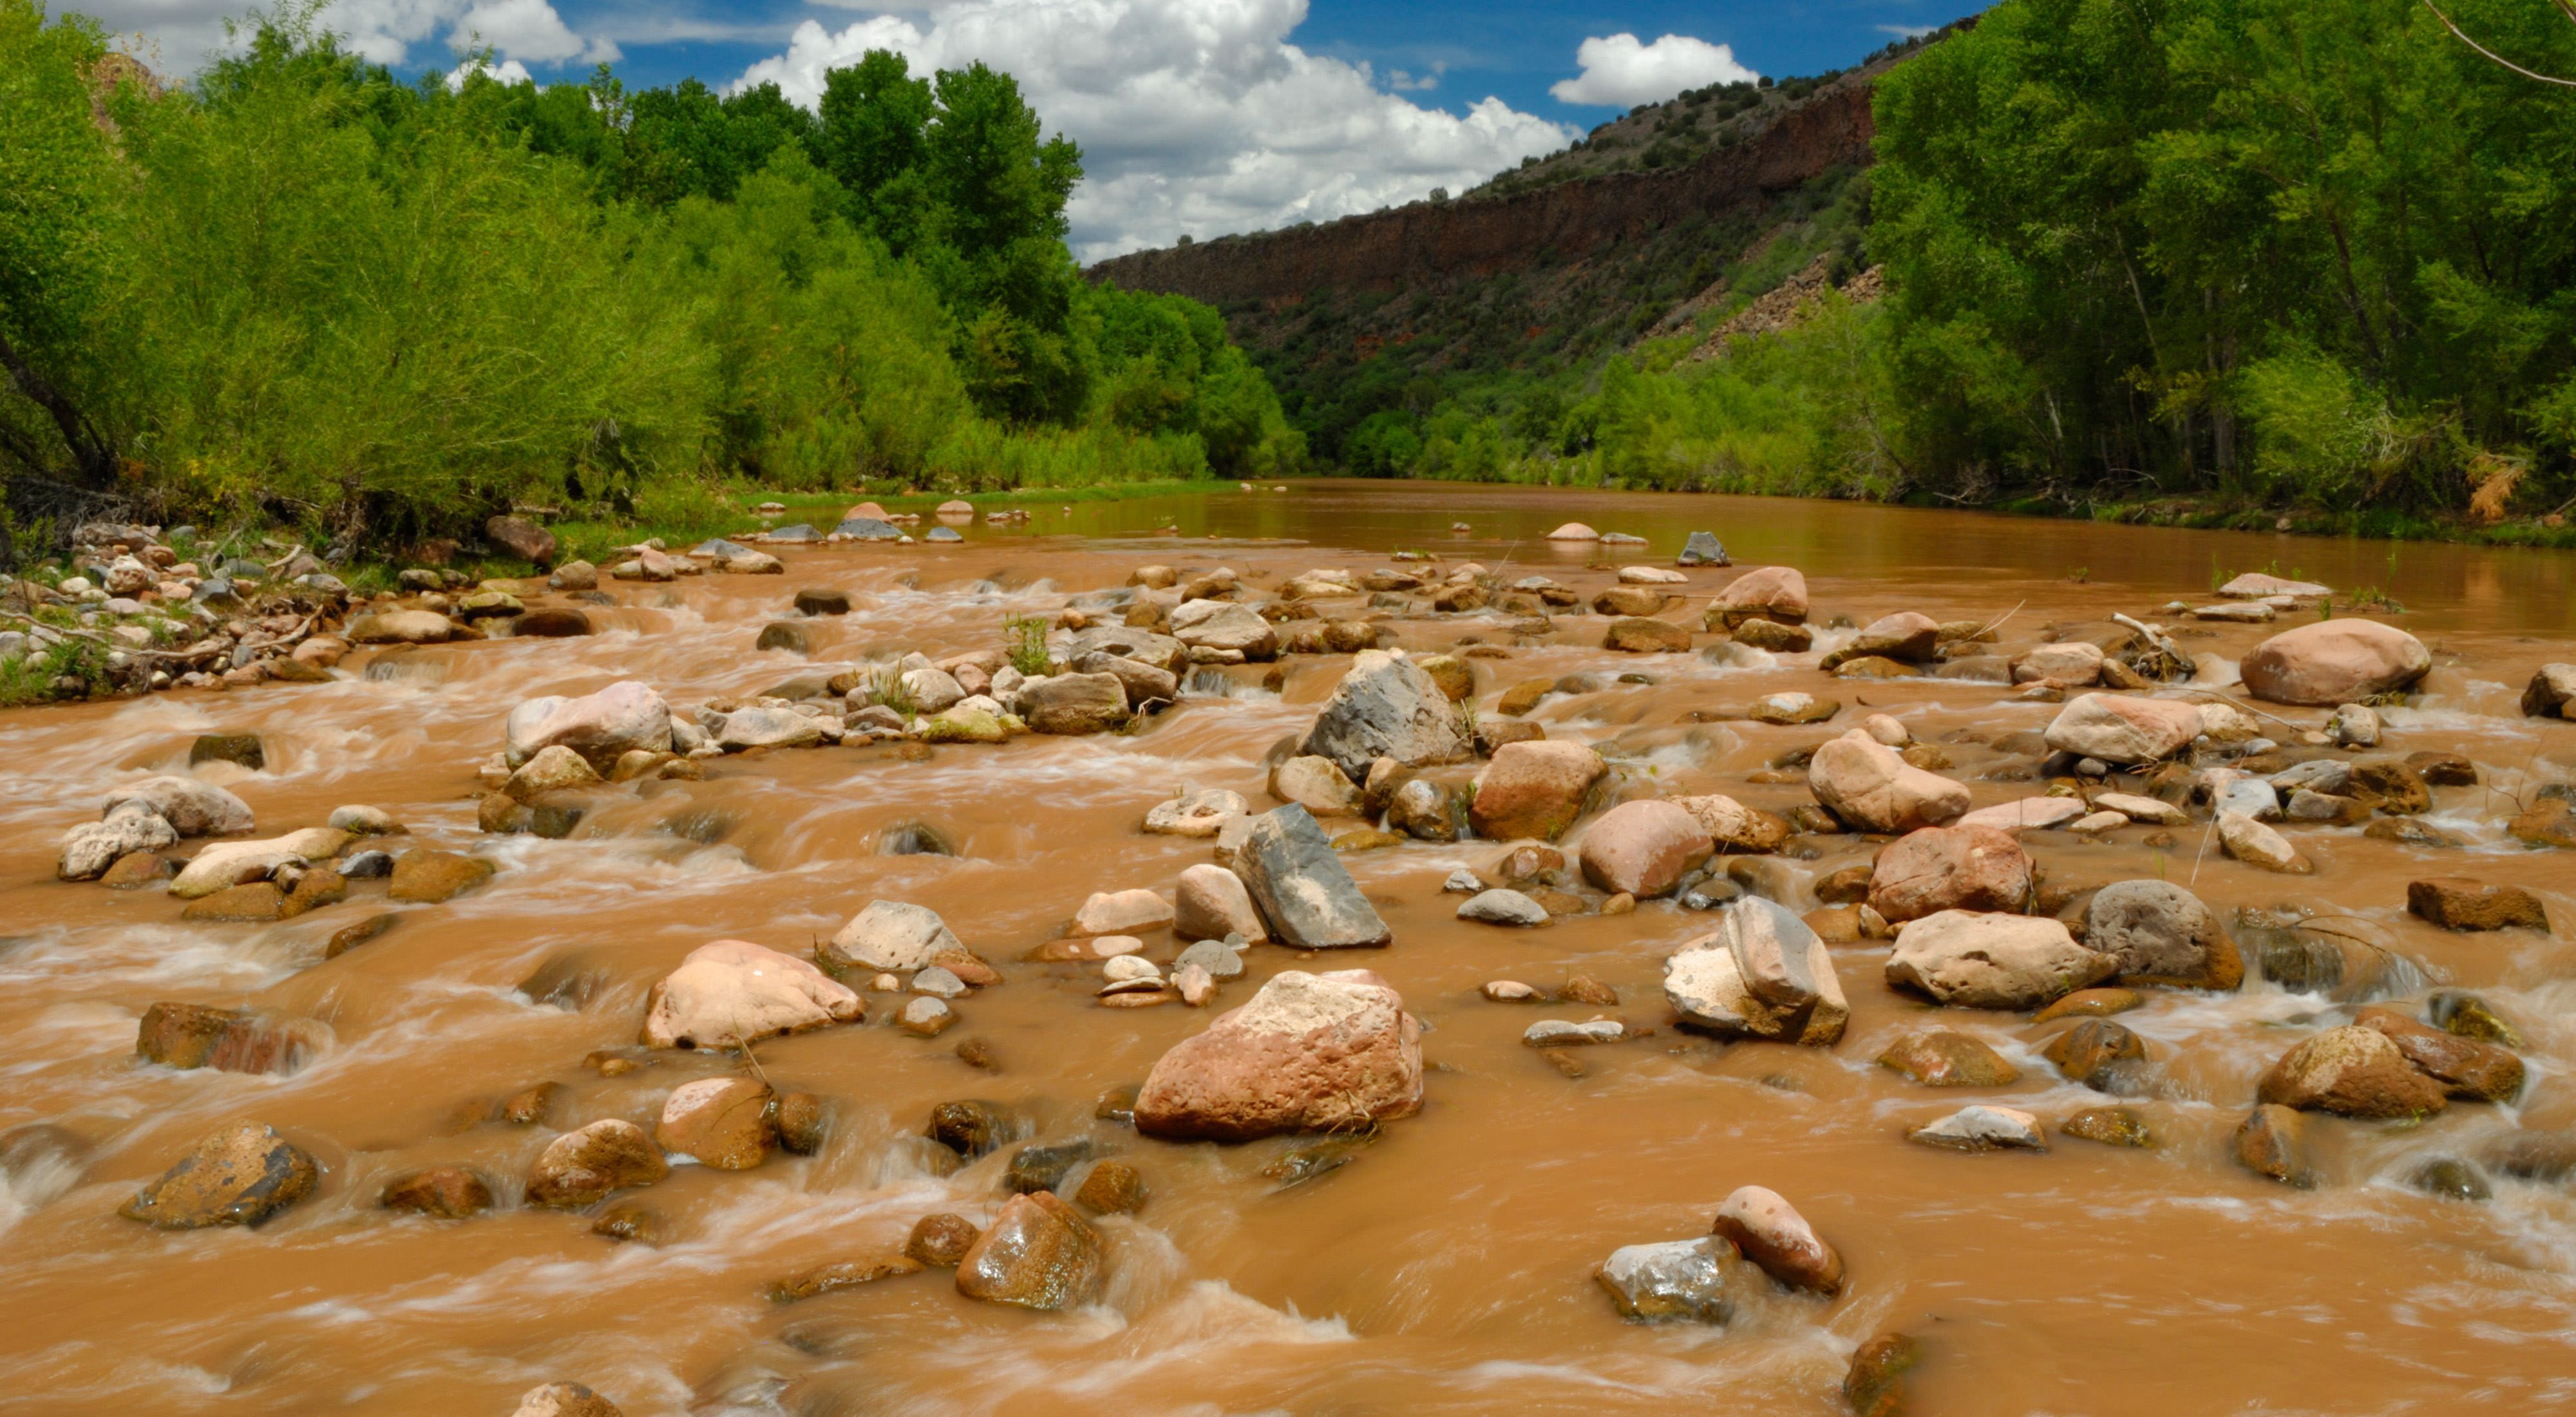 Wide-angle view of a fast-moving, but shallow muddy river.